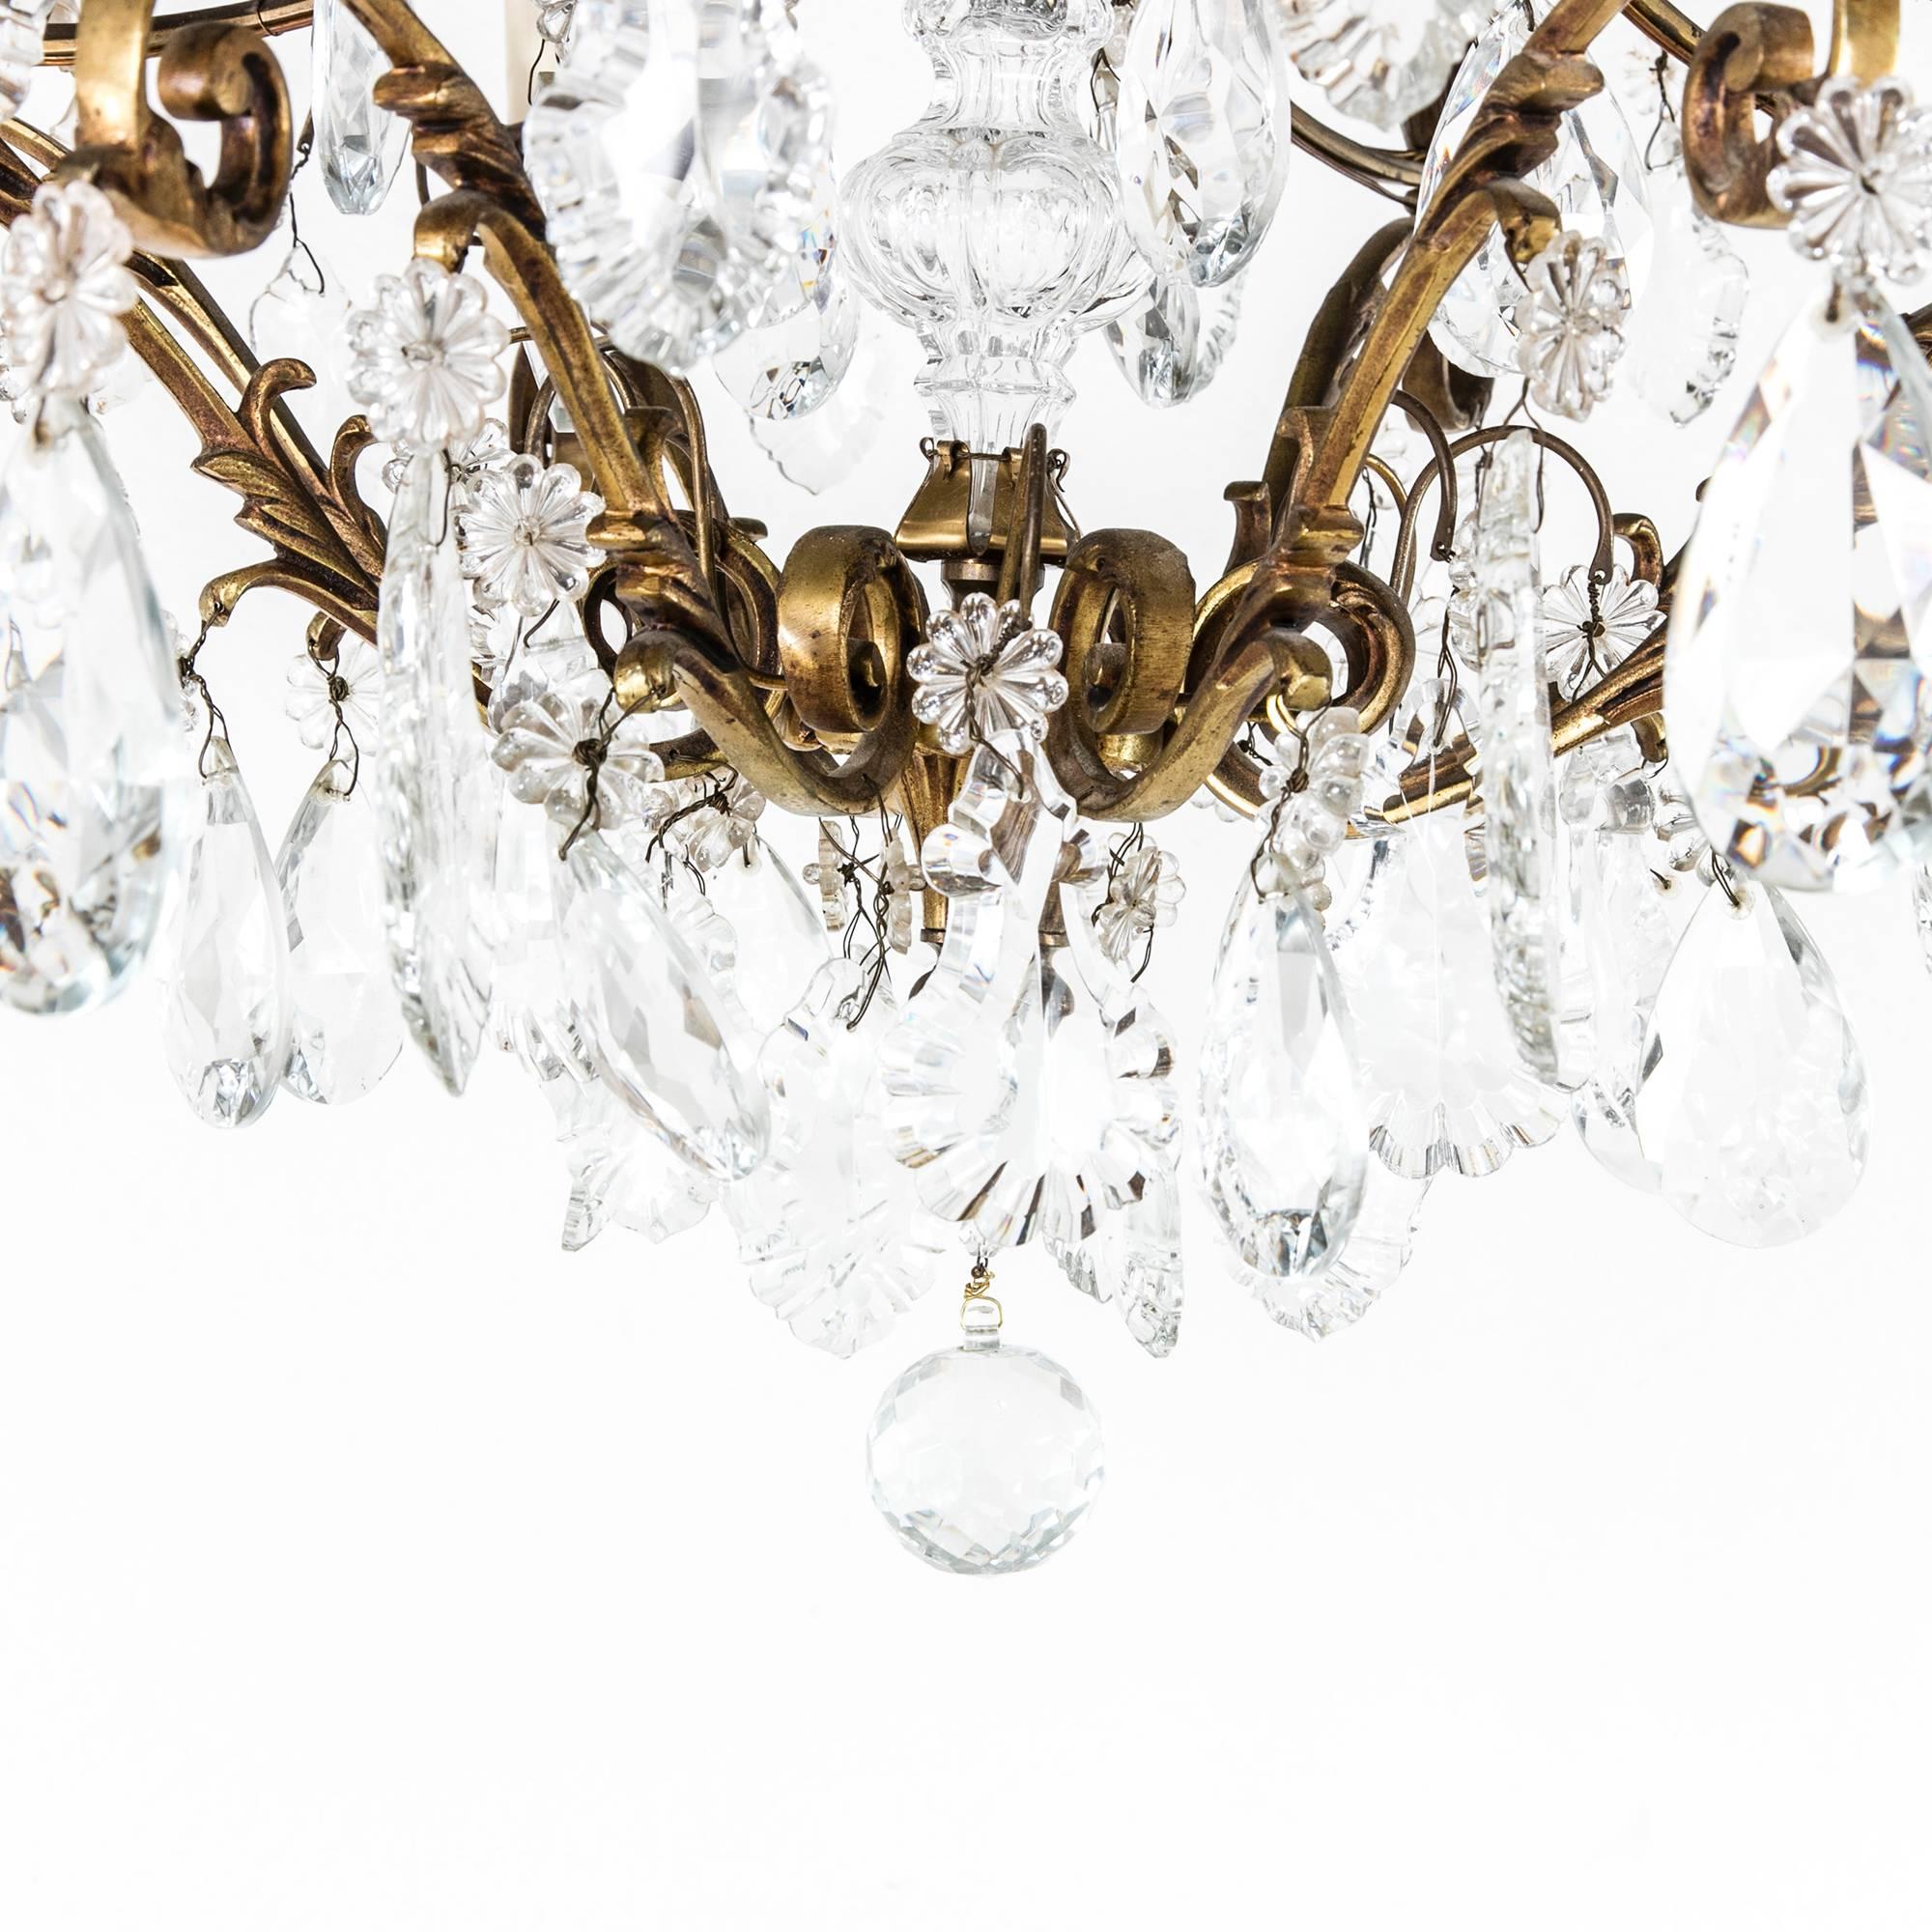 This beautifully patinated gilt bronze chandelier features scrolling acanthus leaves on its arms draped in crystal pendalogues which mirror its curvilinear form. Two additional rows of eight arms each holding large cut crystal teardrops with floral